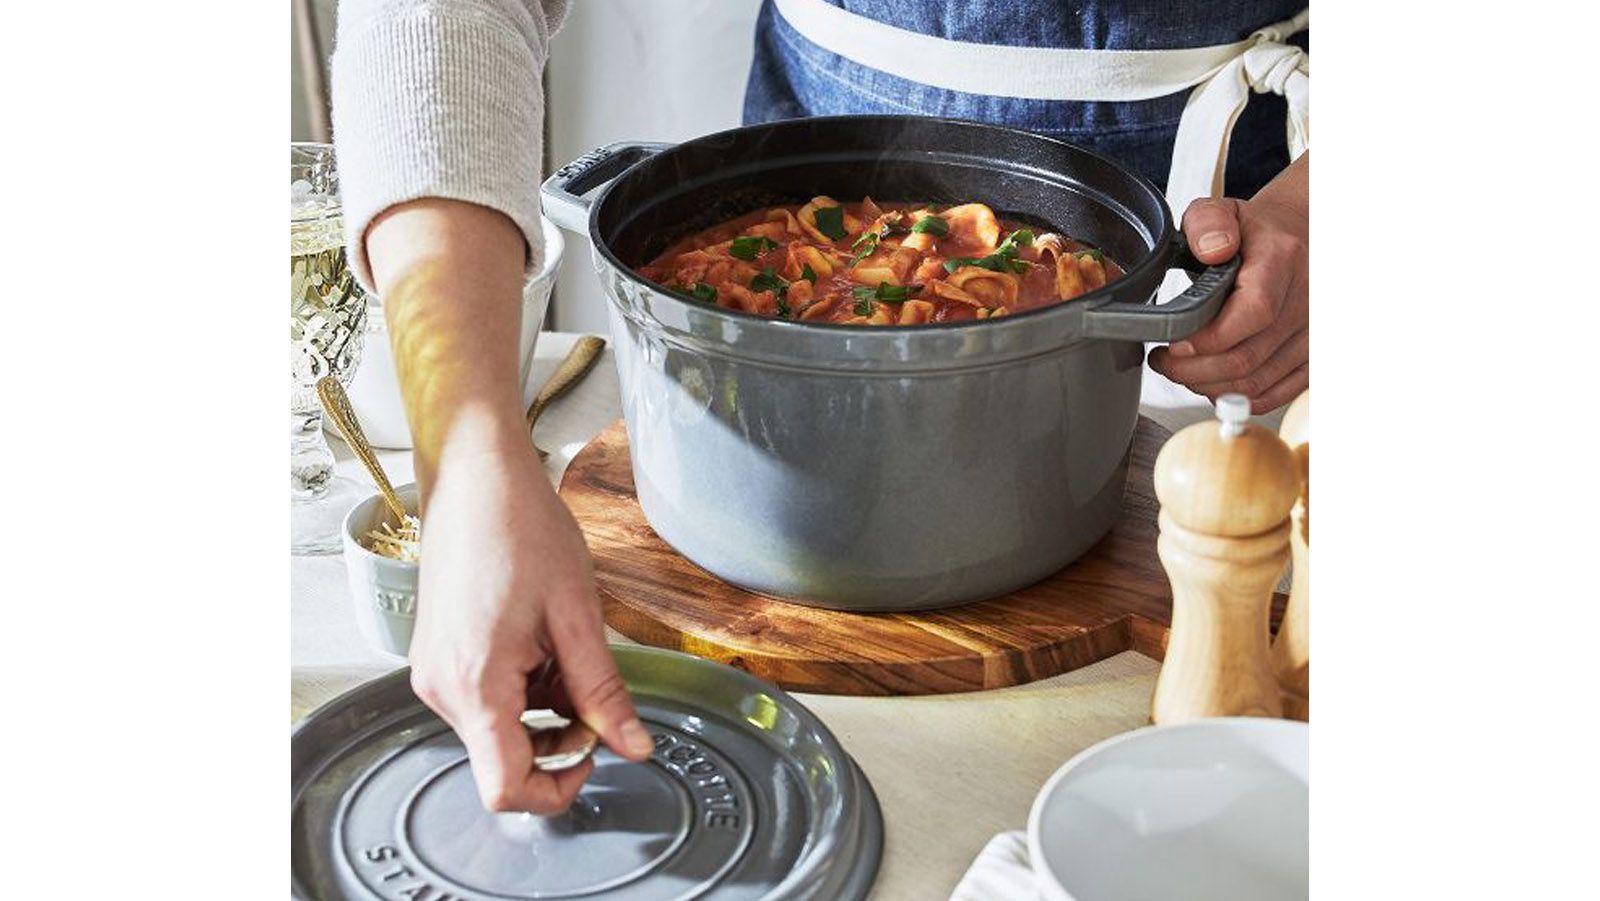 Cook Up Savings with Carote's Black Friday Deal! : r/CheapCookware